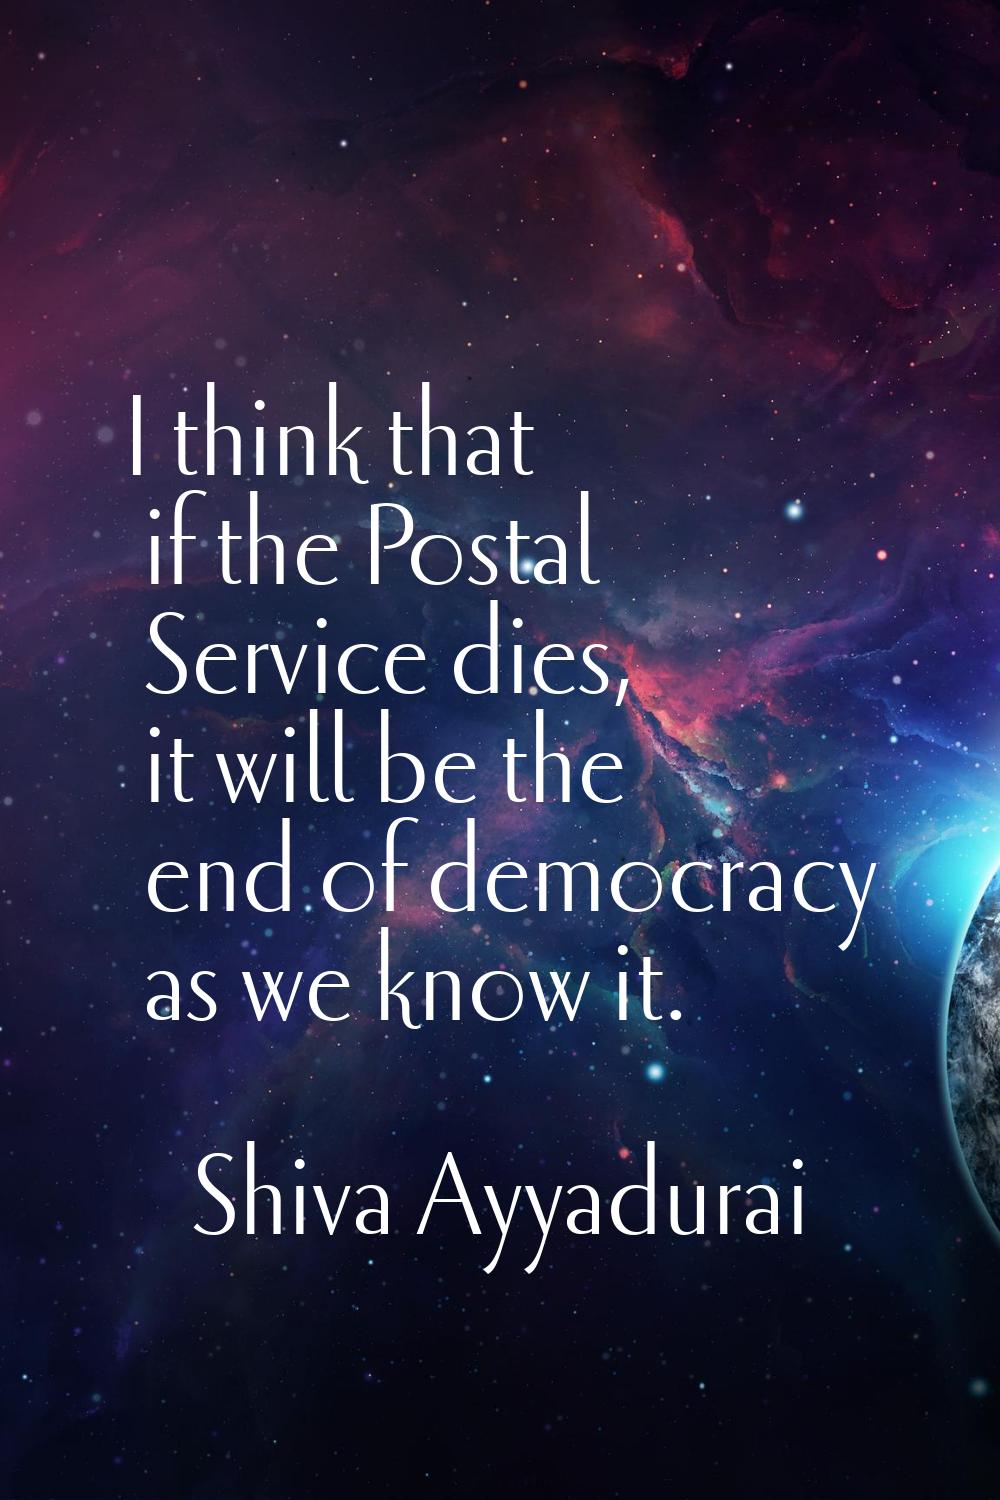 I think that if the Postal Service dies, it will be the end of democracy as we know it.